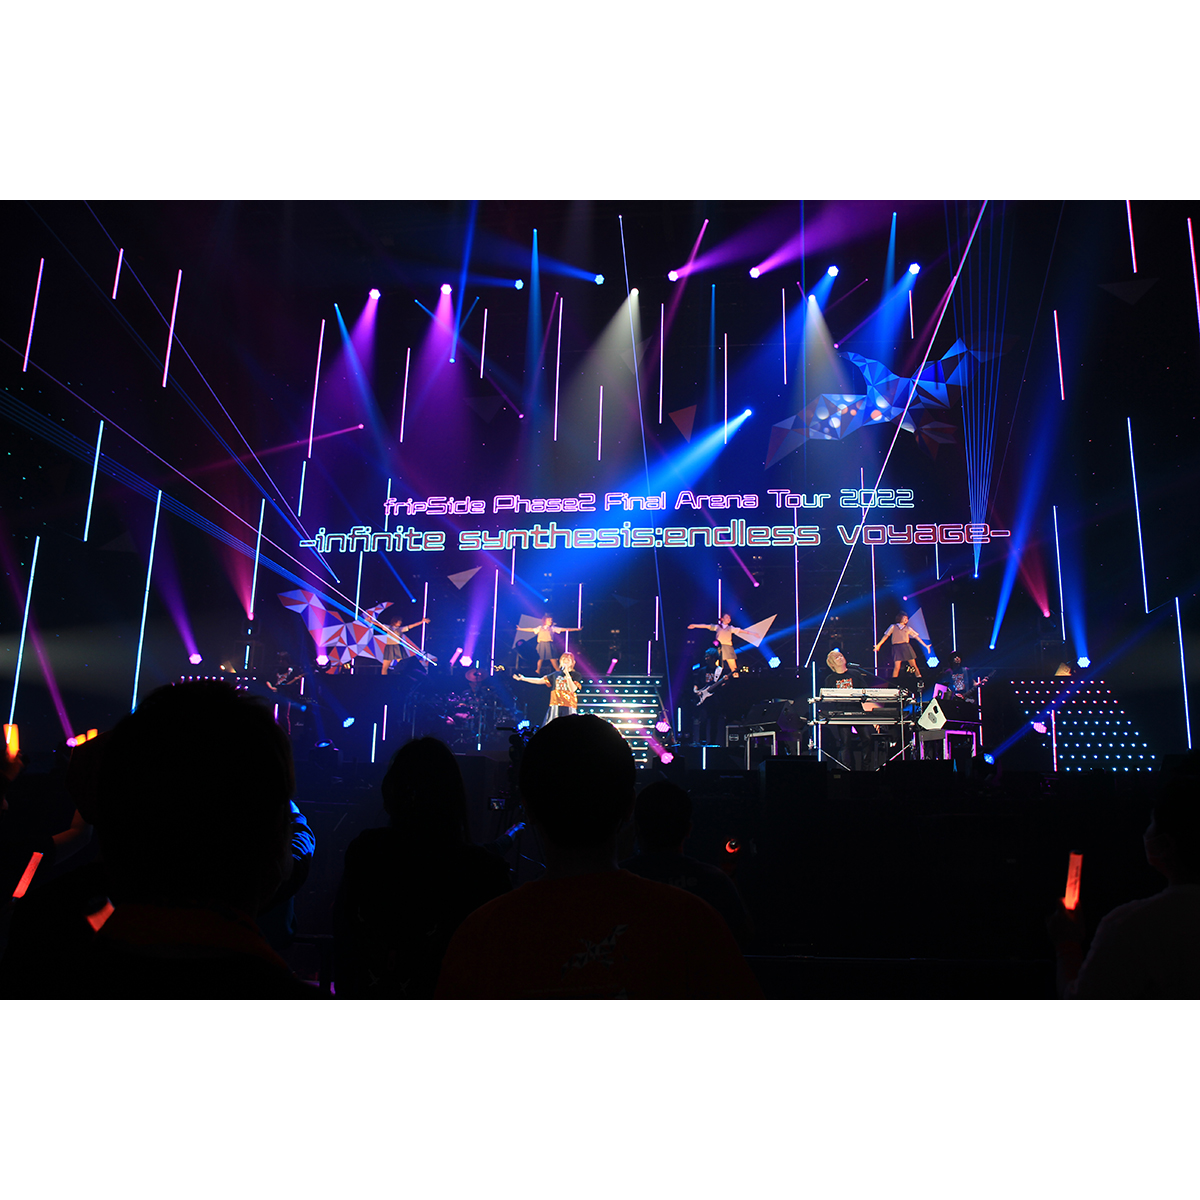 fripSideのアリーナツアー“fripSide Phase2 Final Arena Tour 2022 -infinite synthesis:endless voyage-”がスタート！ - 画像一覧（2/7）